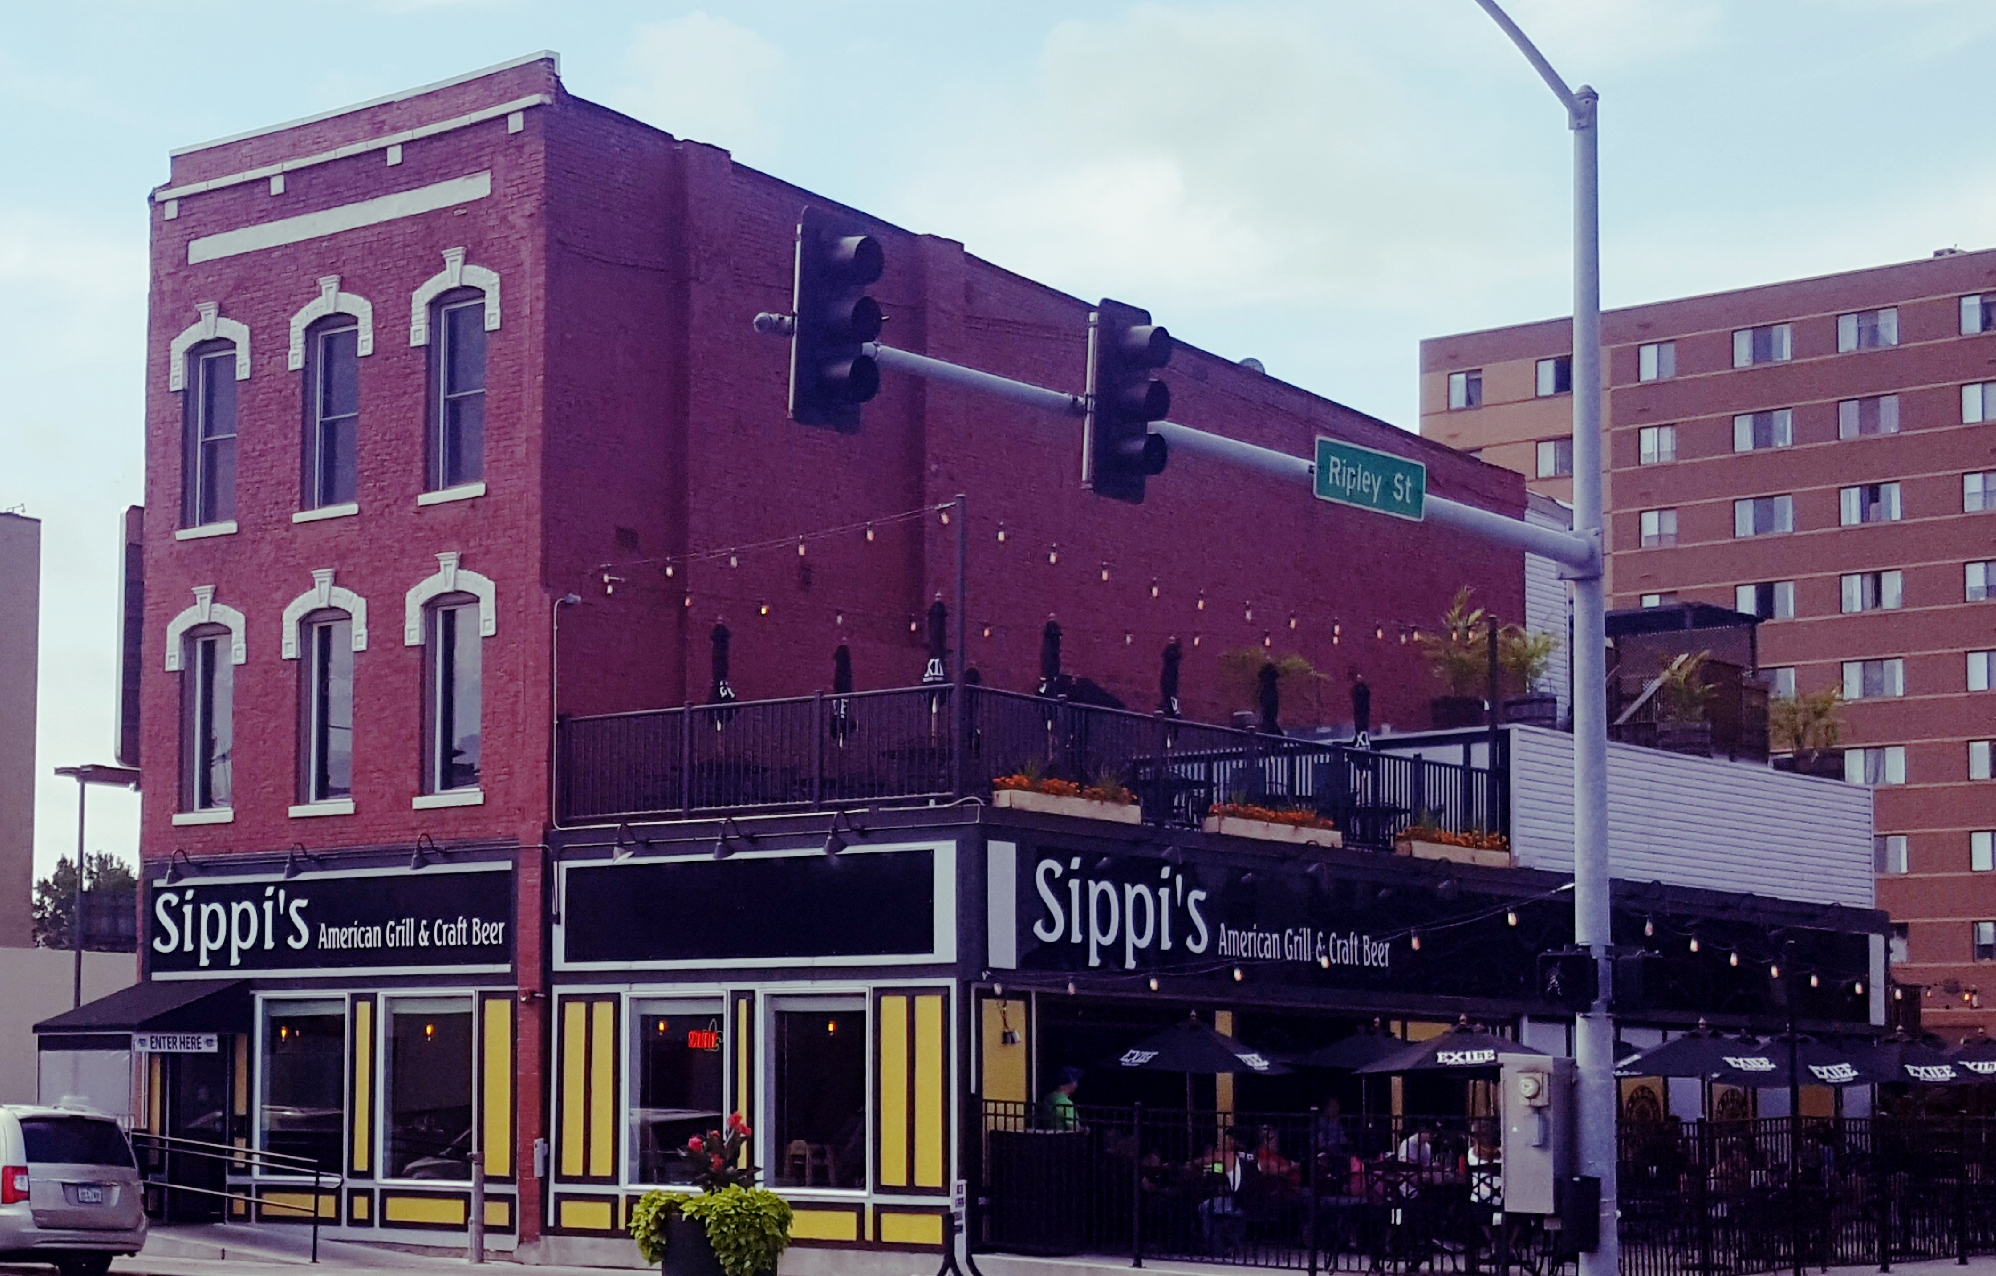 Sippis American Grill & Craft Beer